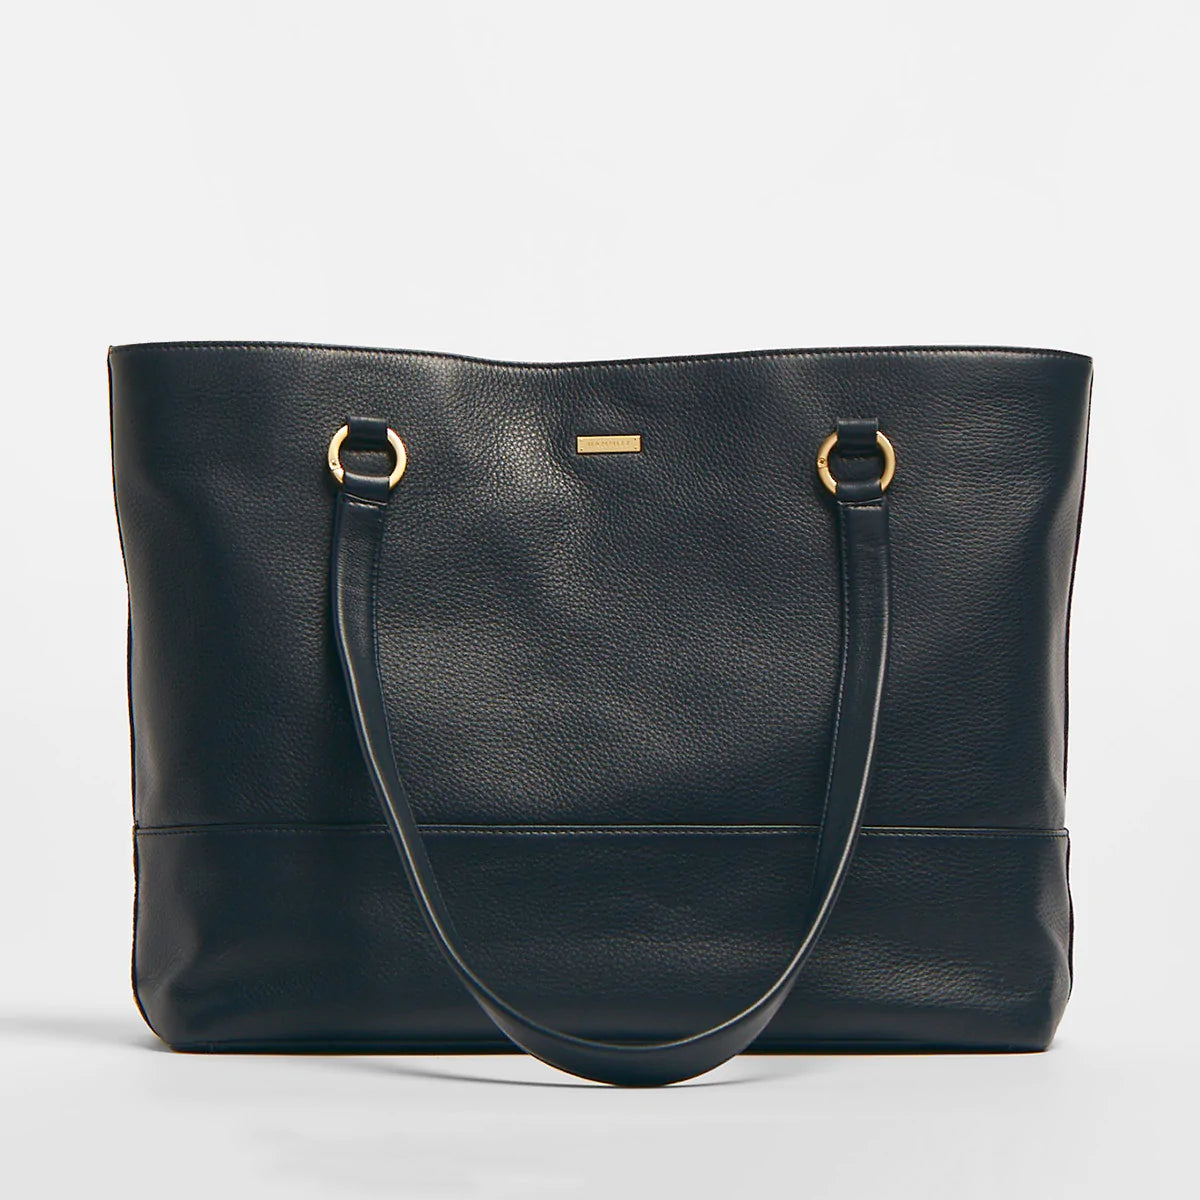 Andersen Tote in Navy Tides/Brushed Gold Craft